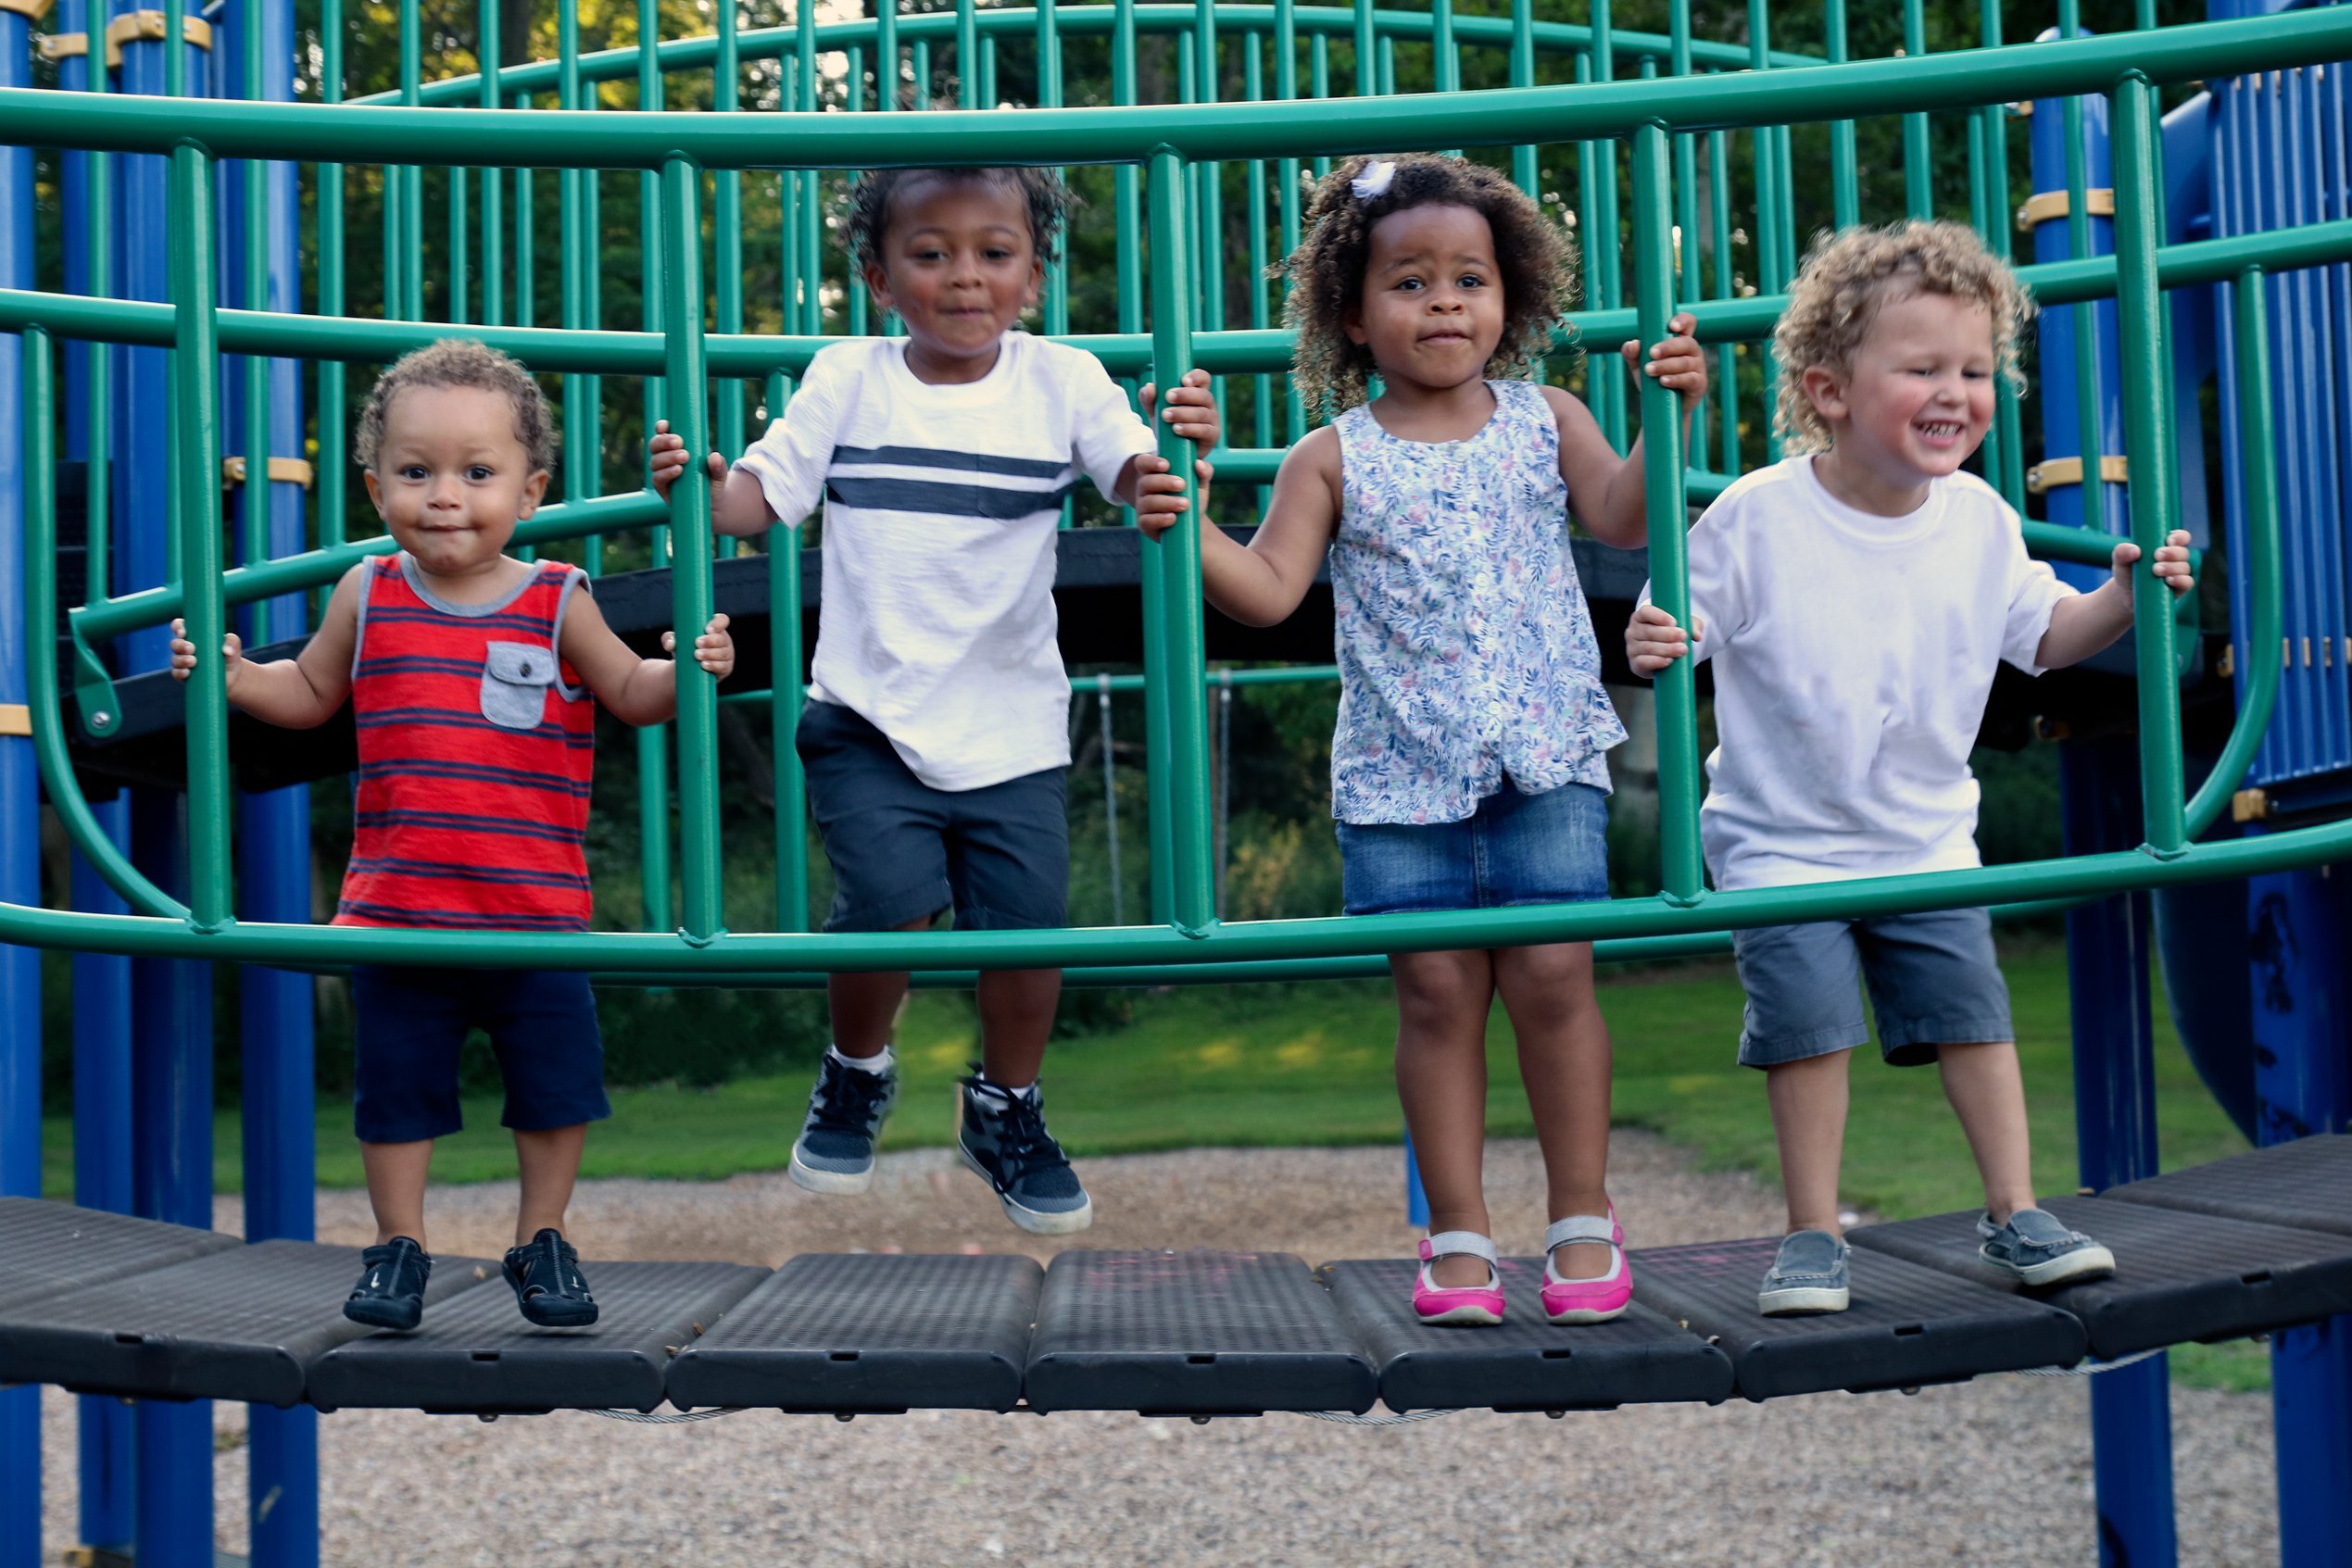 Diverse group of kids playing. | Photo: Shutterstock